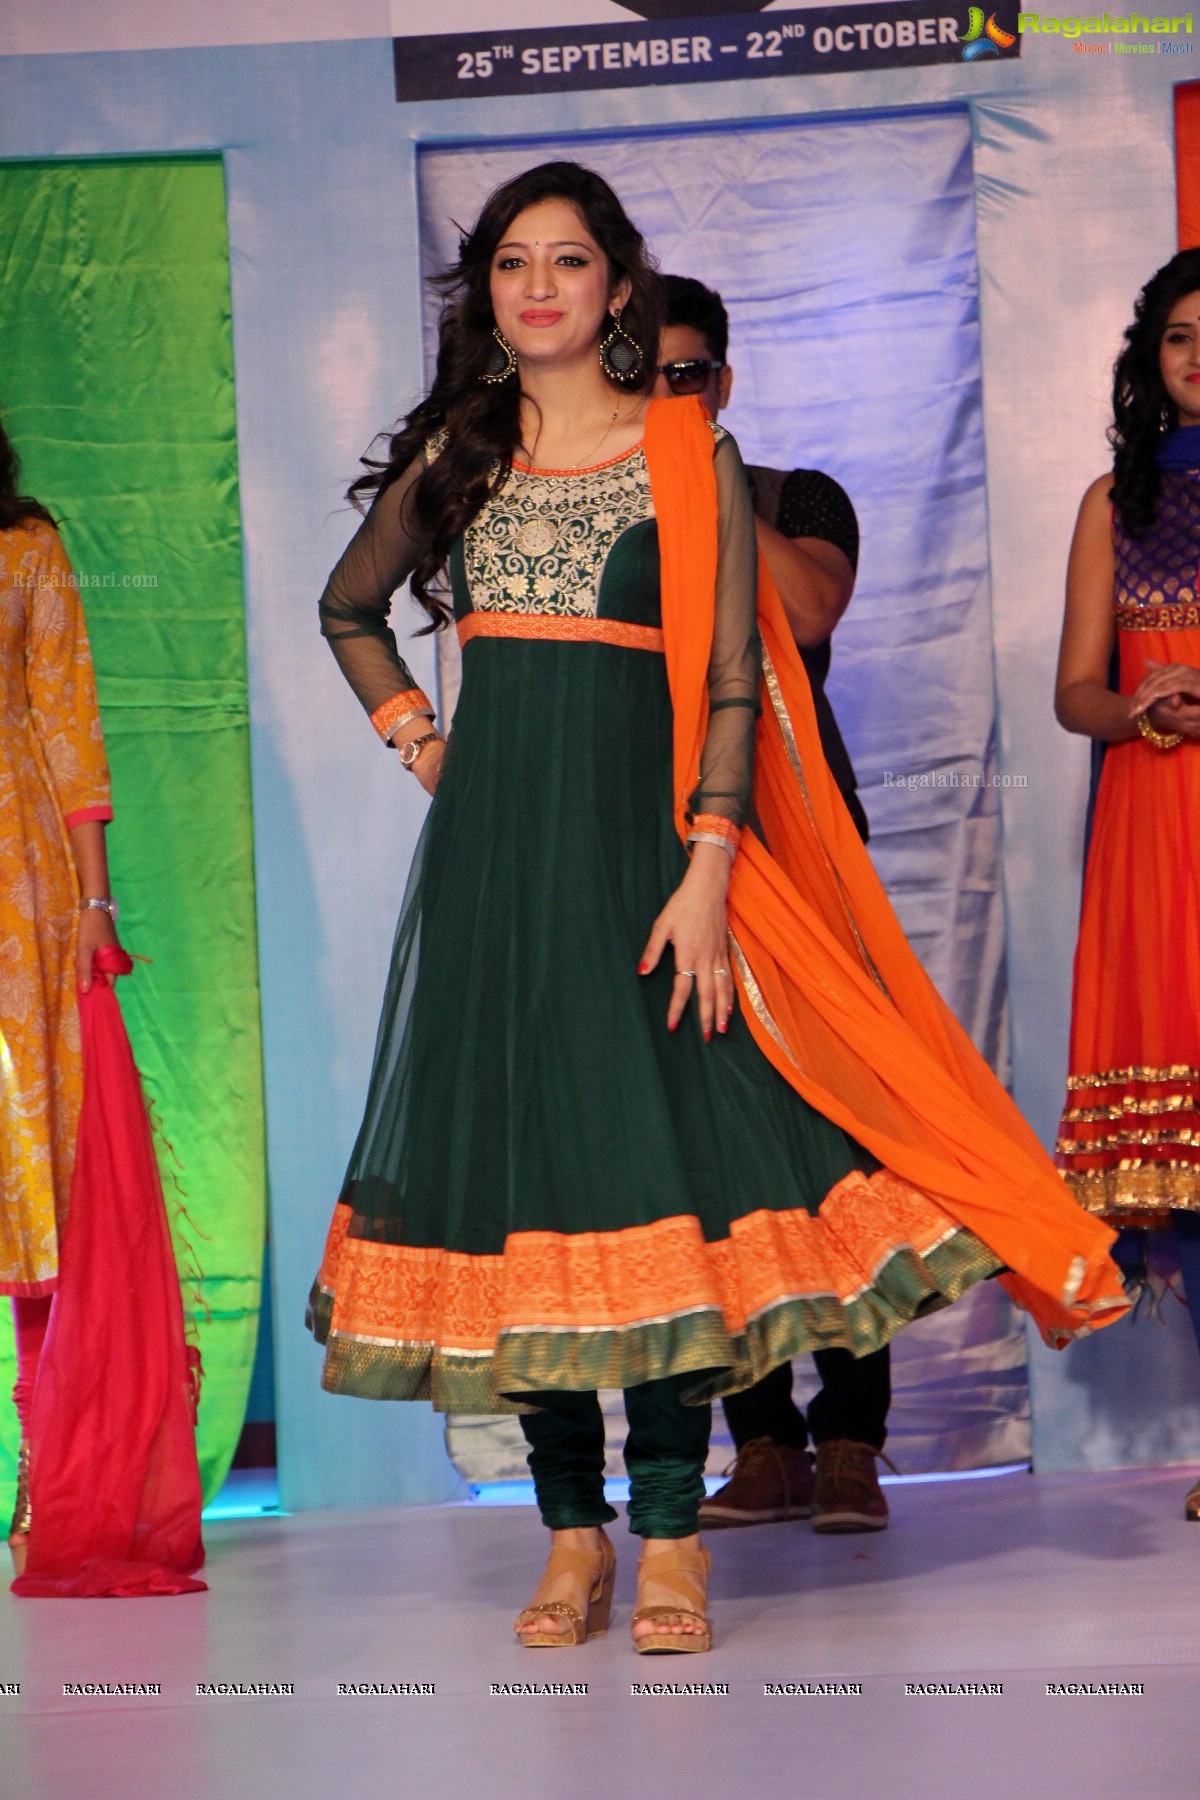 fbb Dusshera Collection Launch, Hyderabad